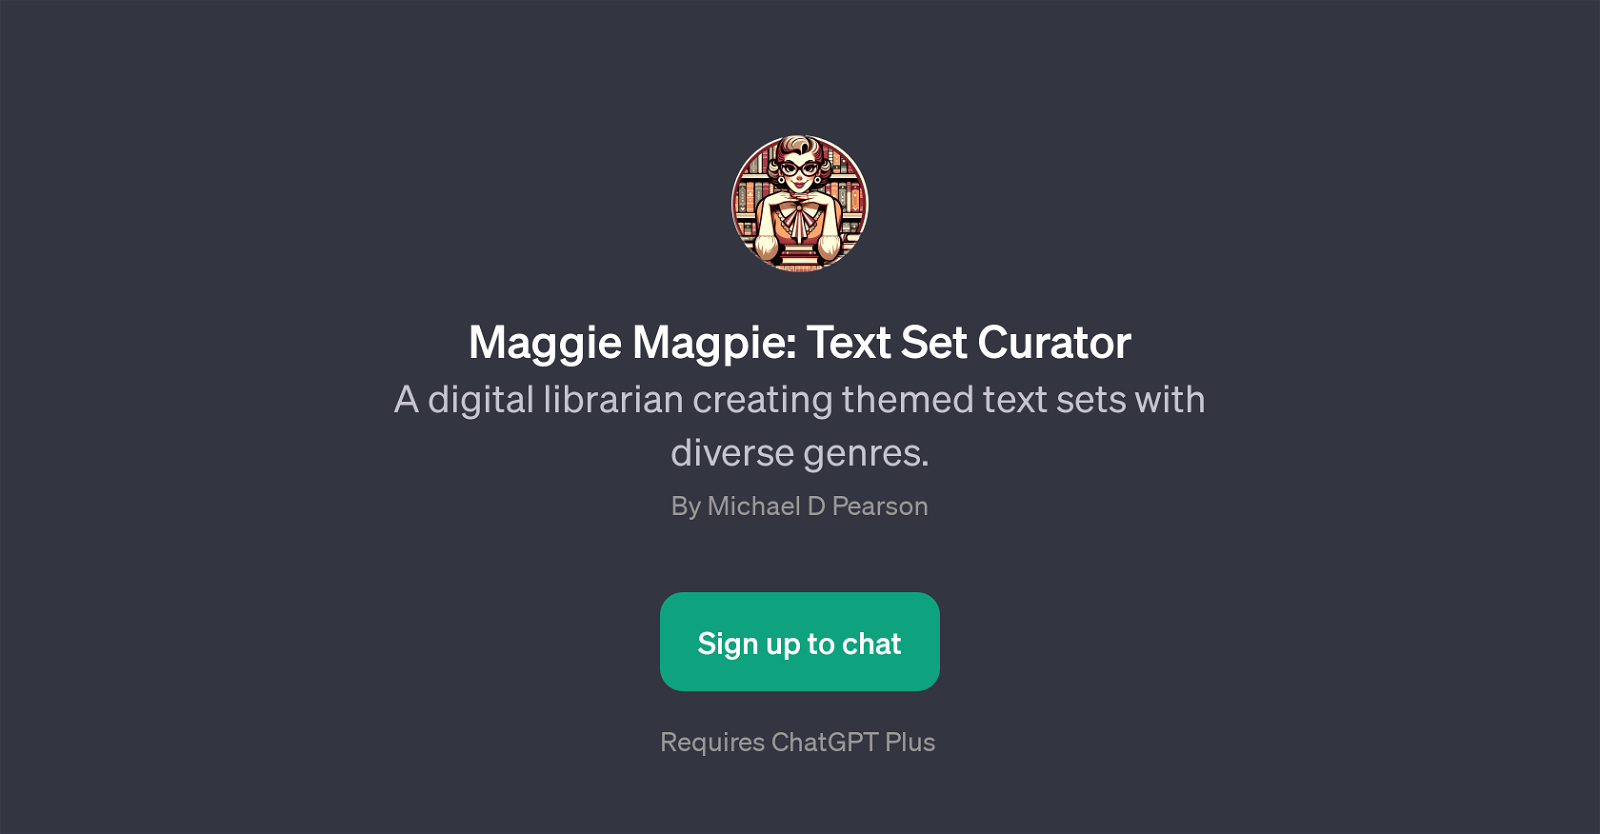 Maggie Magpie: Text Set Curator website